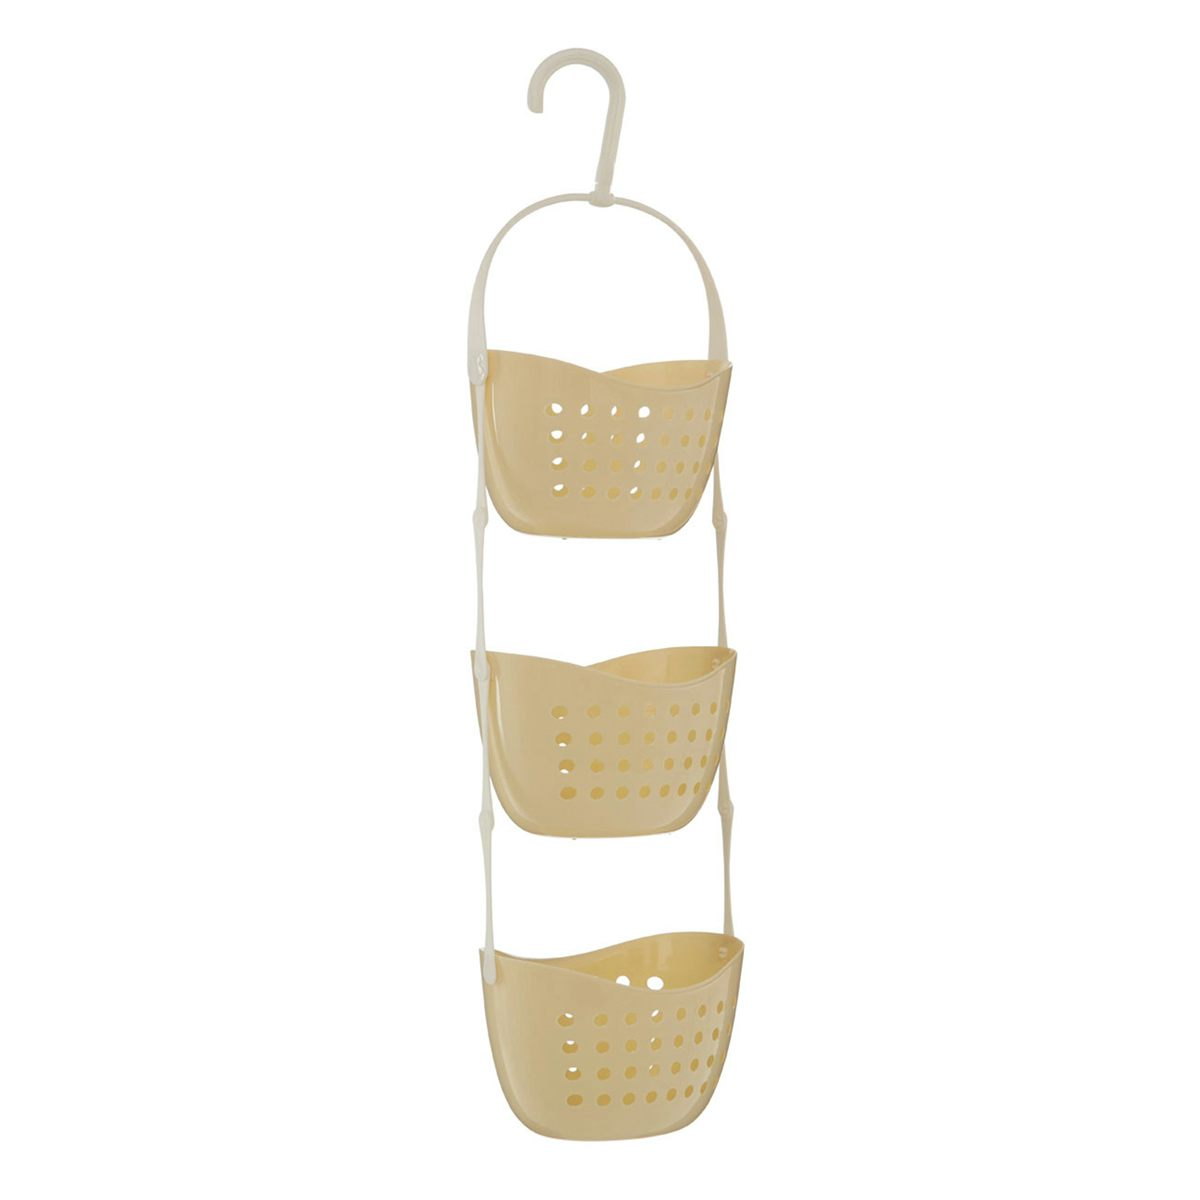 Accents Cream 3 tier hanging shower caddy